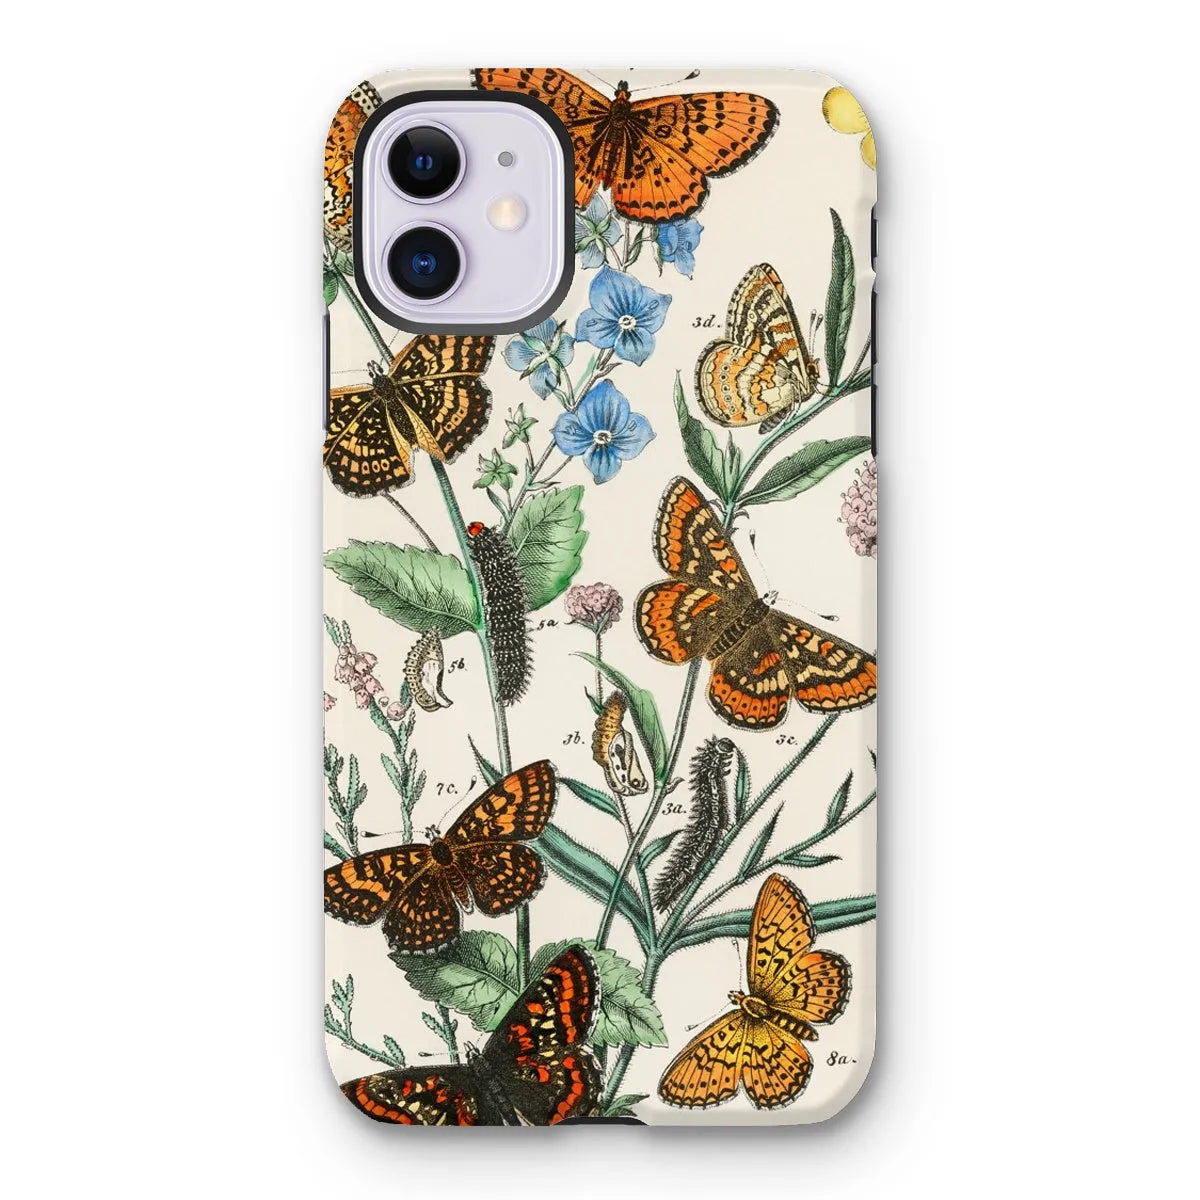 This Butterfly Aesthetic Art Phone Case - William Forsell Kirby - Iphone 11 / Matte - Mobile Phone Cases - Aesthetic Art